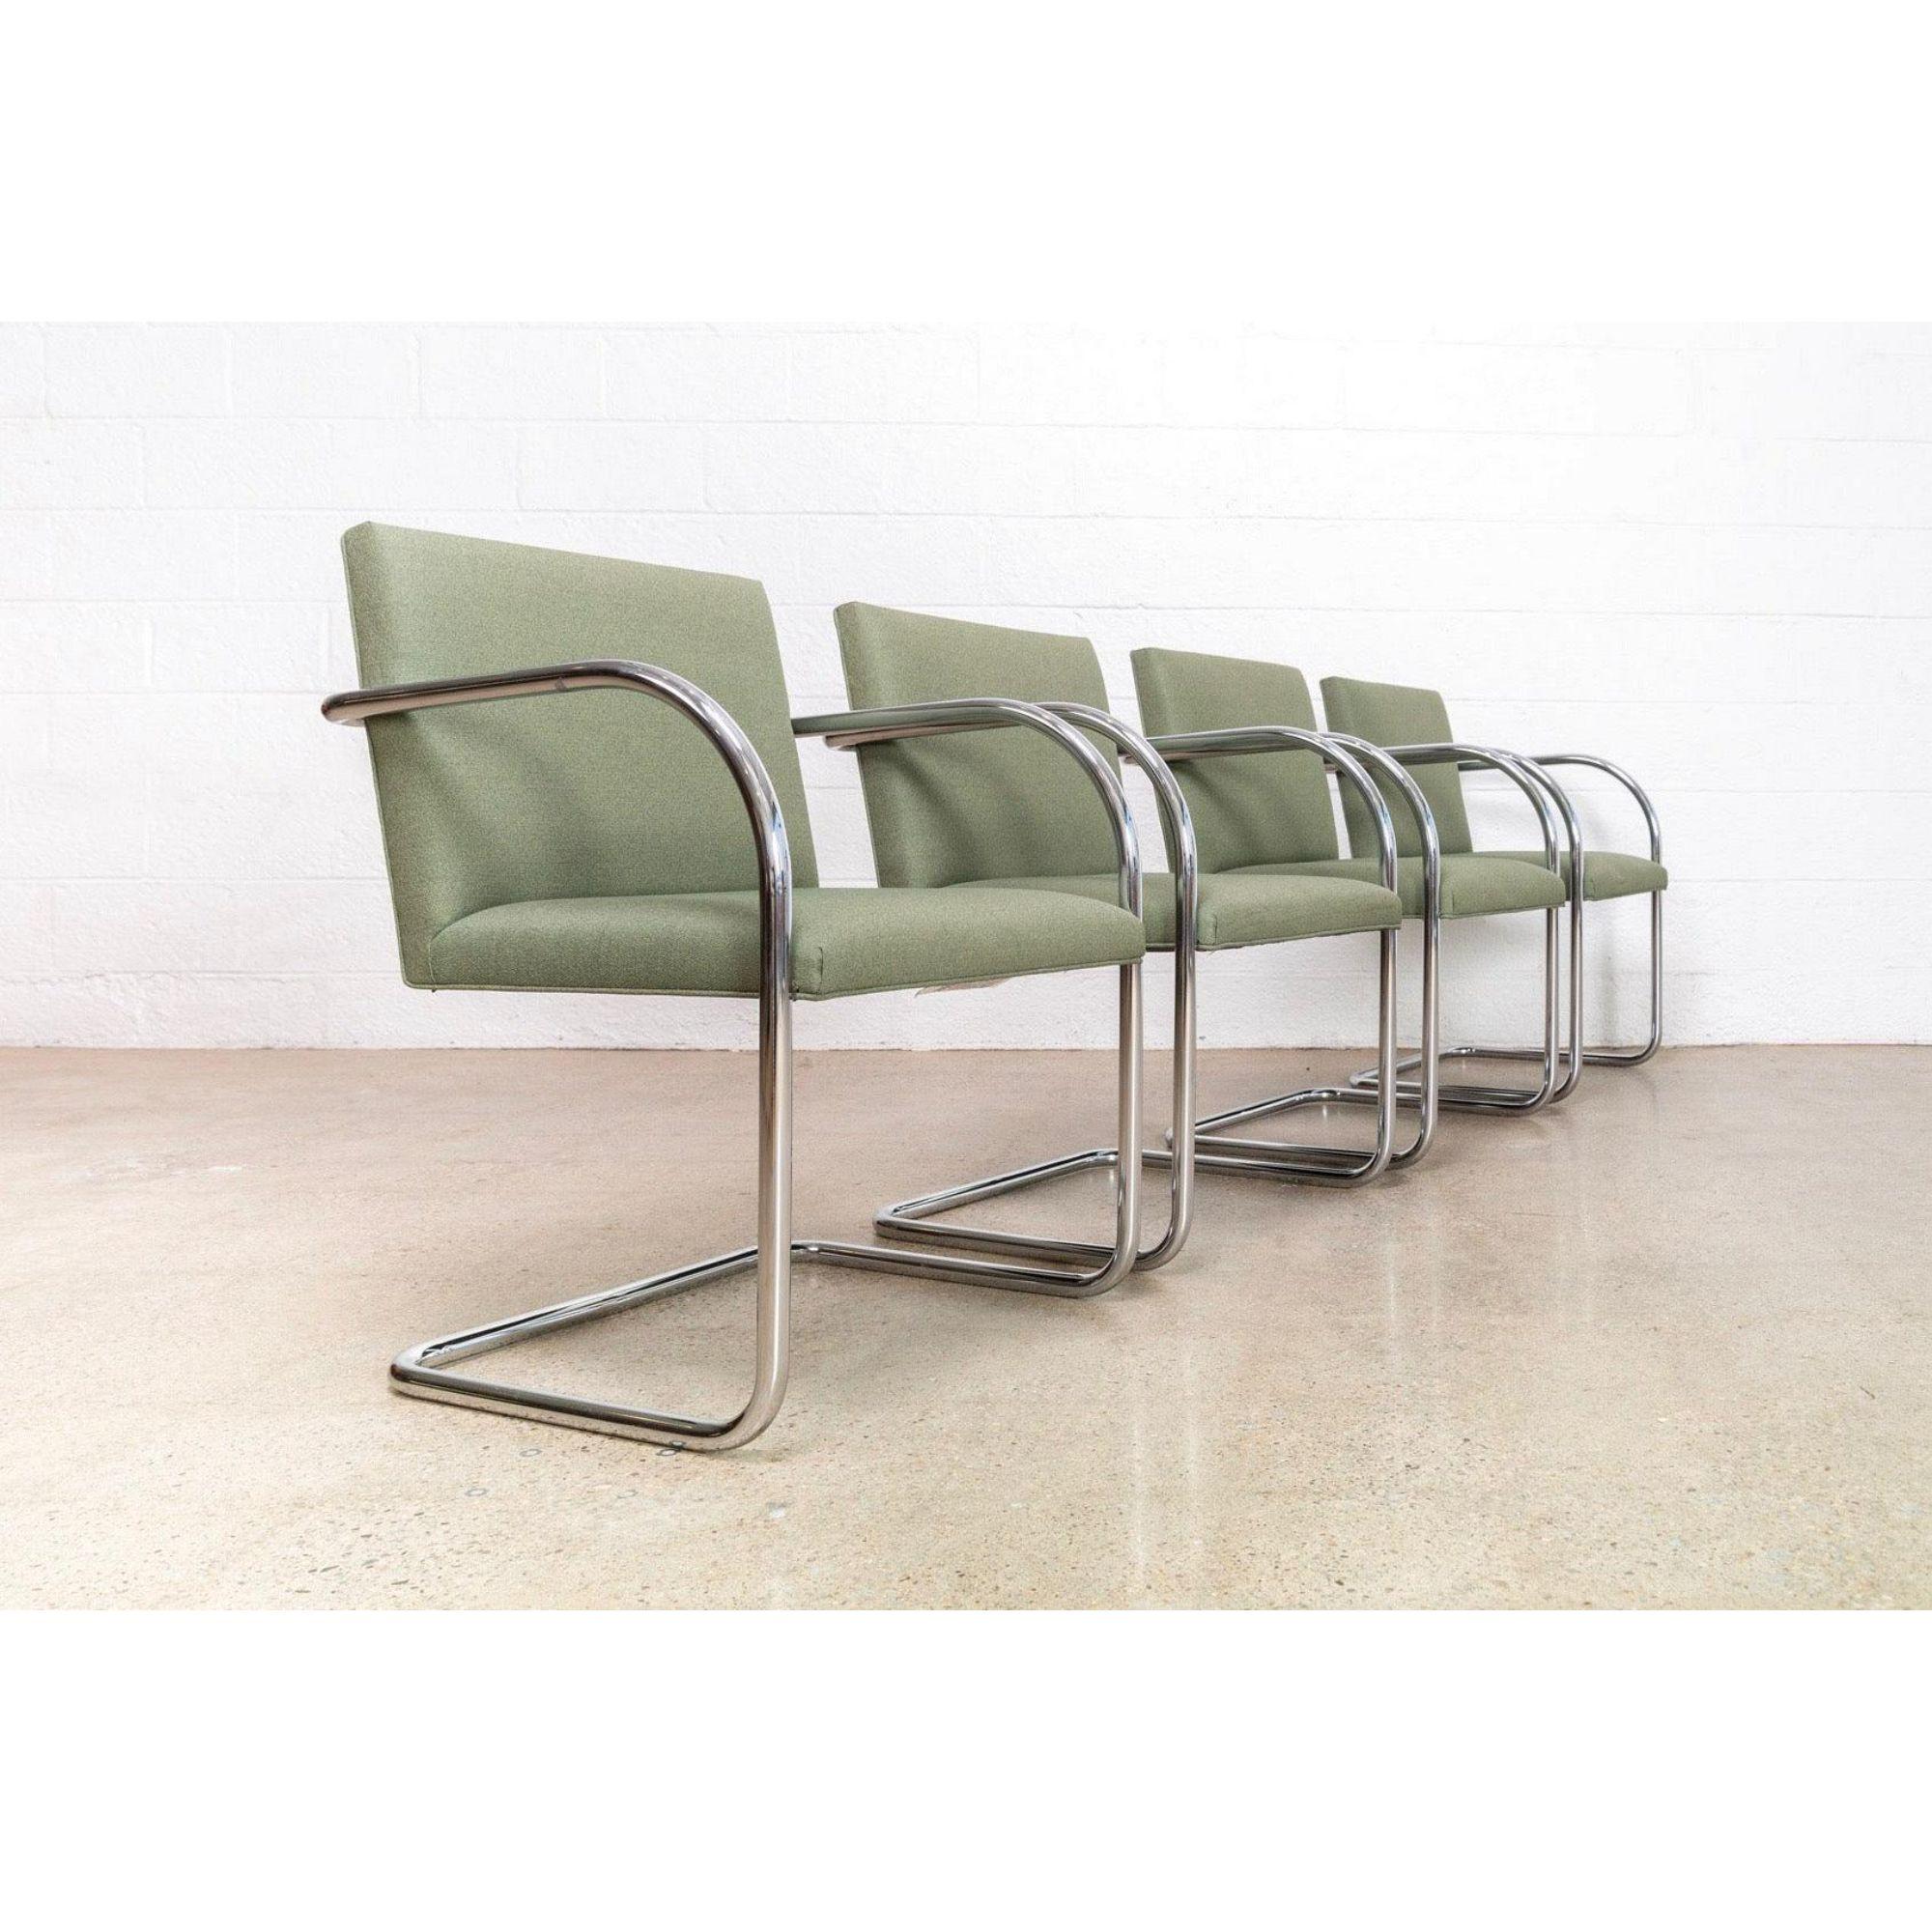 American Bauhaus Green Brno Tubular Cantilever Dining Chairs by Mies Van Der Rohe